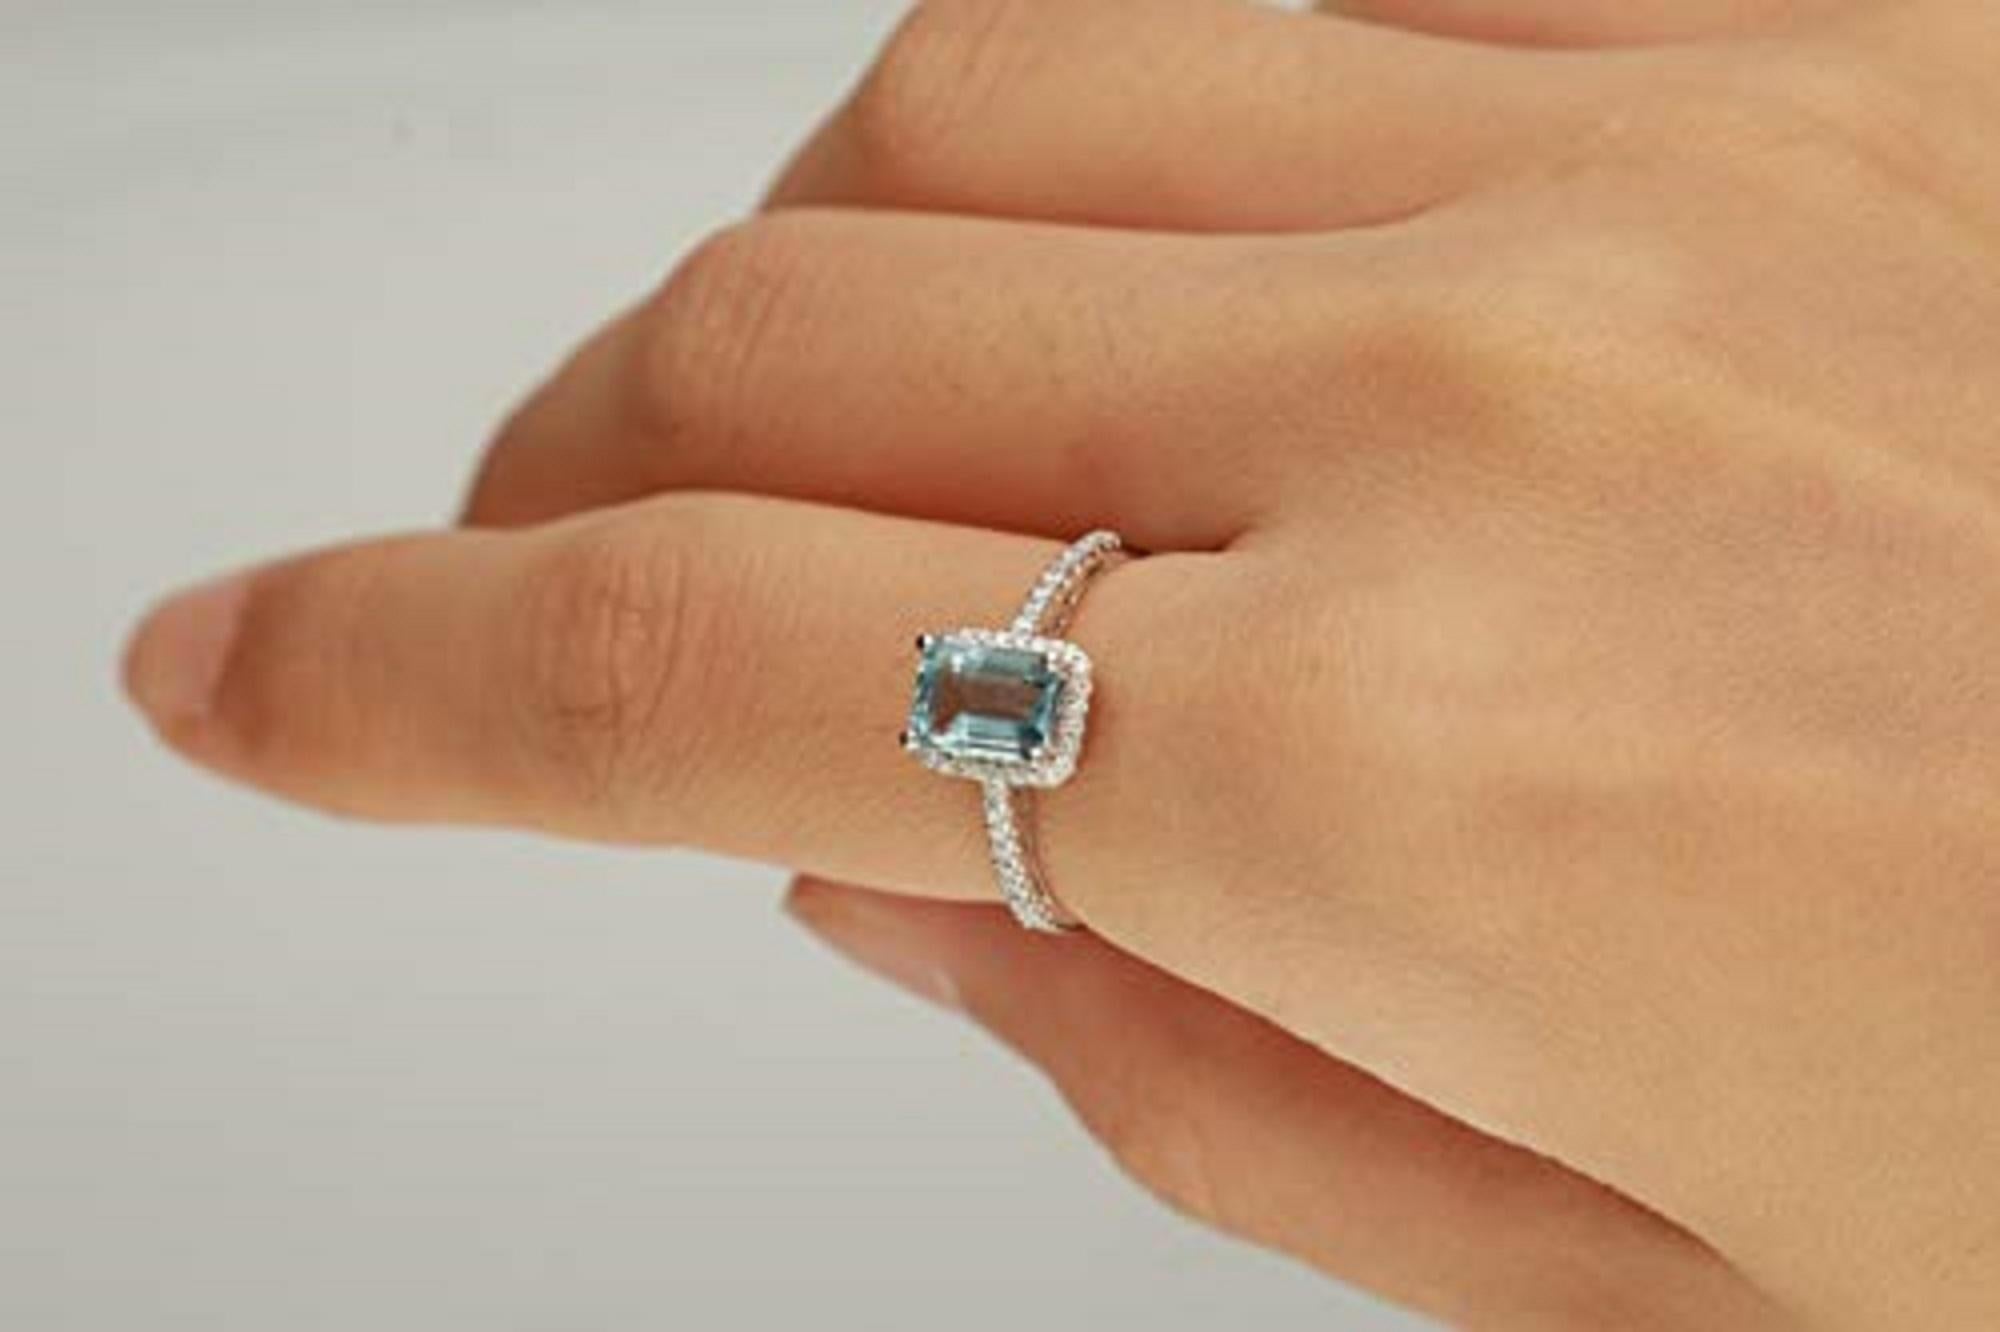 A gorgeous emerald-cut Gin & Grace Genuine aquamarine gemstone rests at the crown of this gorgeous ring. Surrounded by white diamonds that extend down the slender shank, this luminous ring is crafted of 10-karat white gold. Gemstone colors: Blue